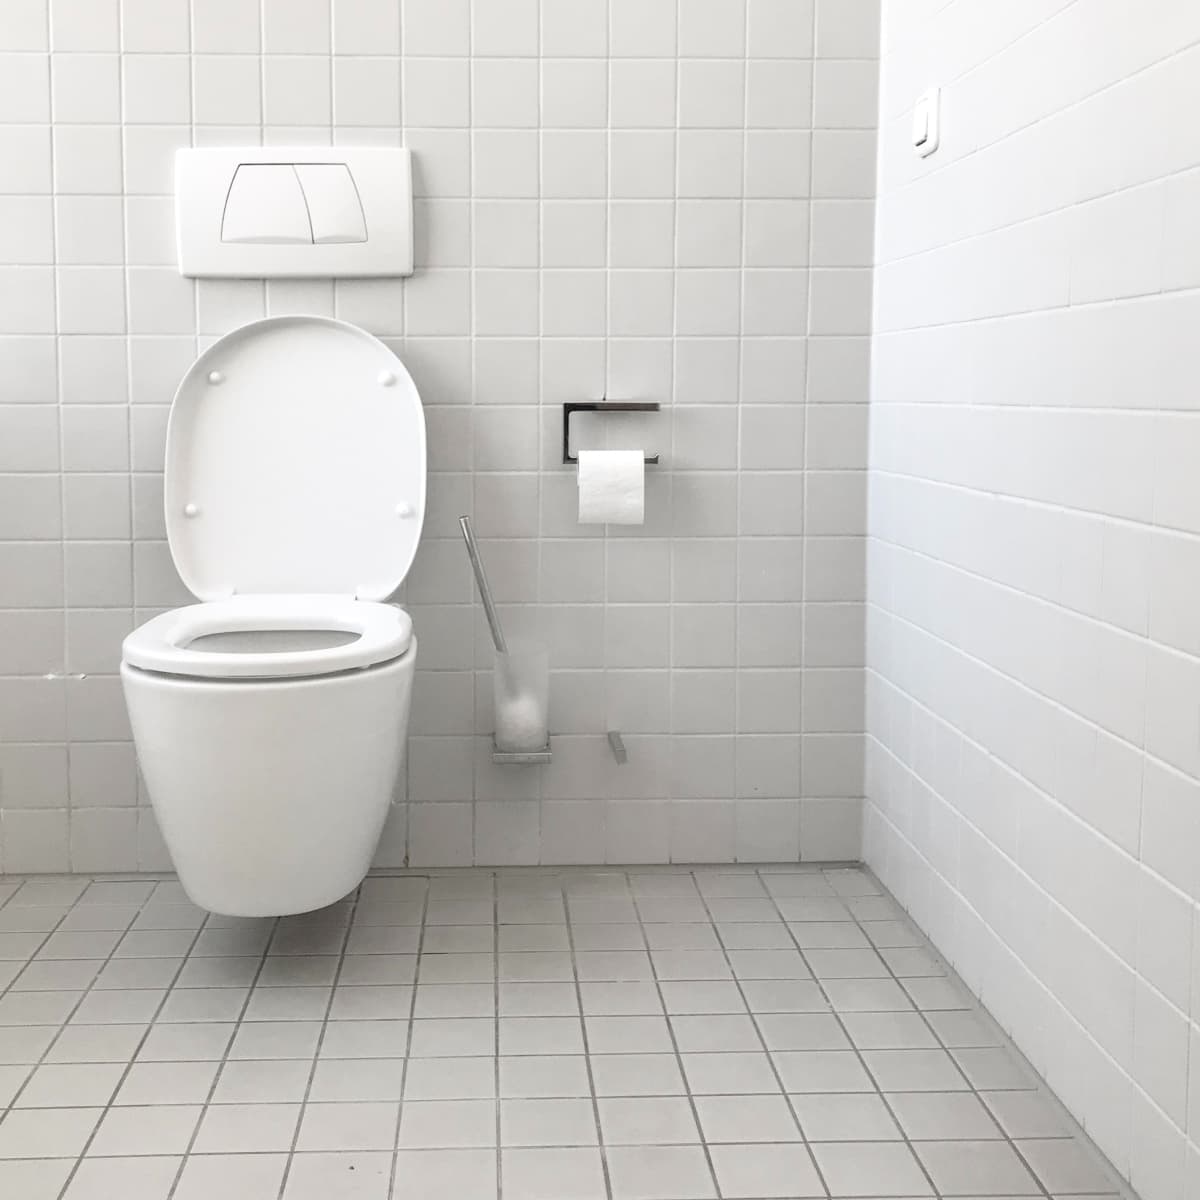 How to Replace a Toilet Seat – Fix it in 15